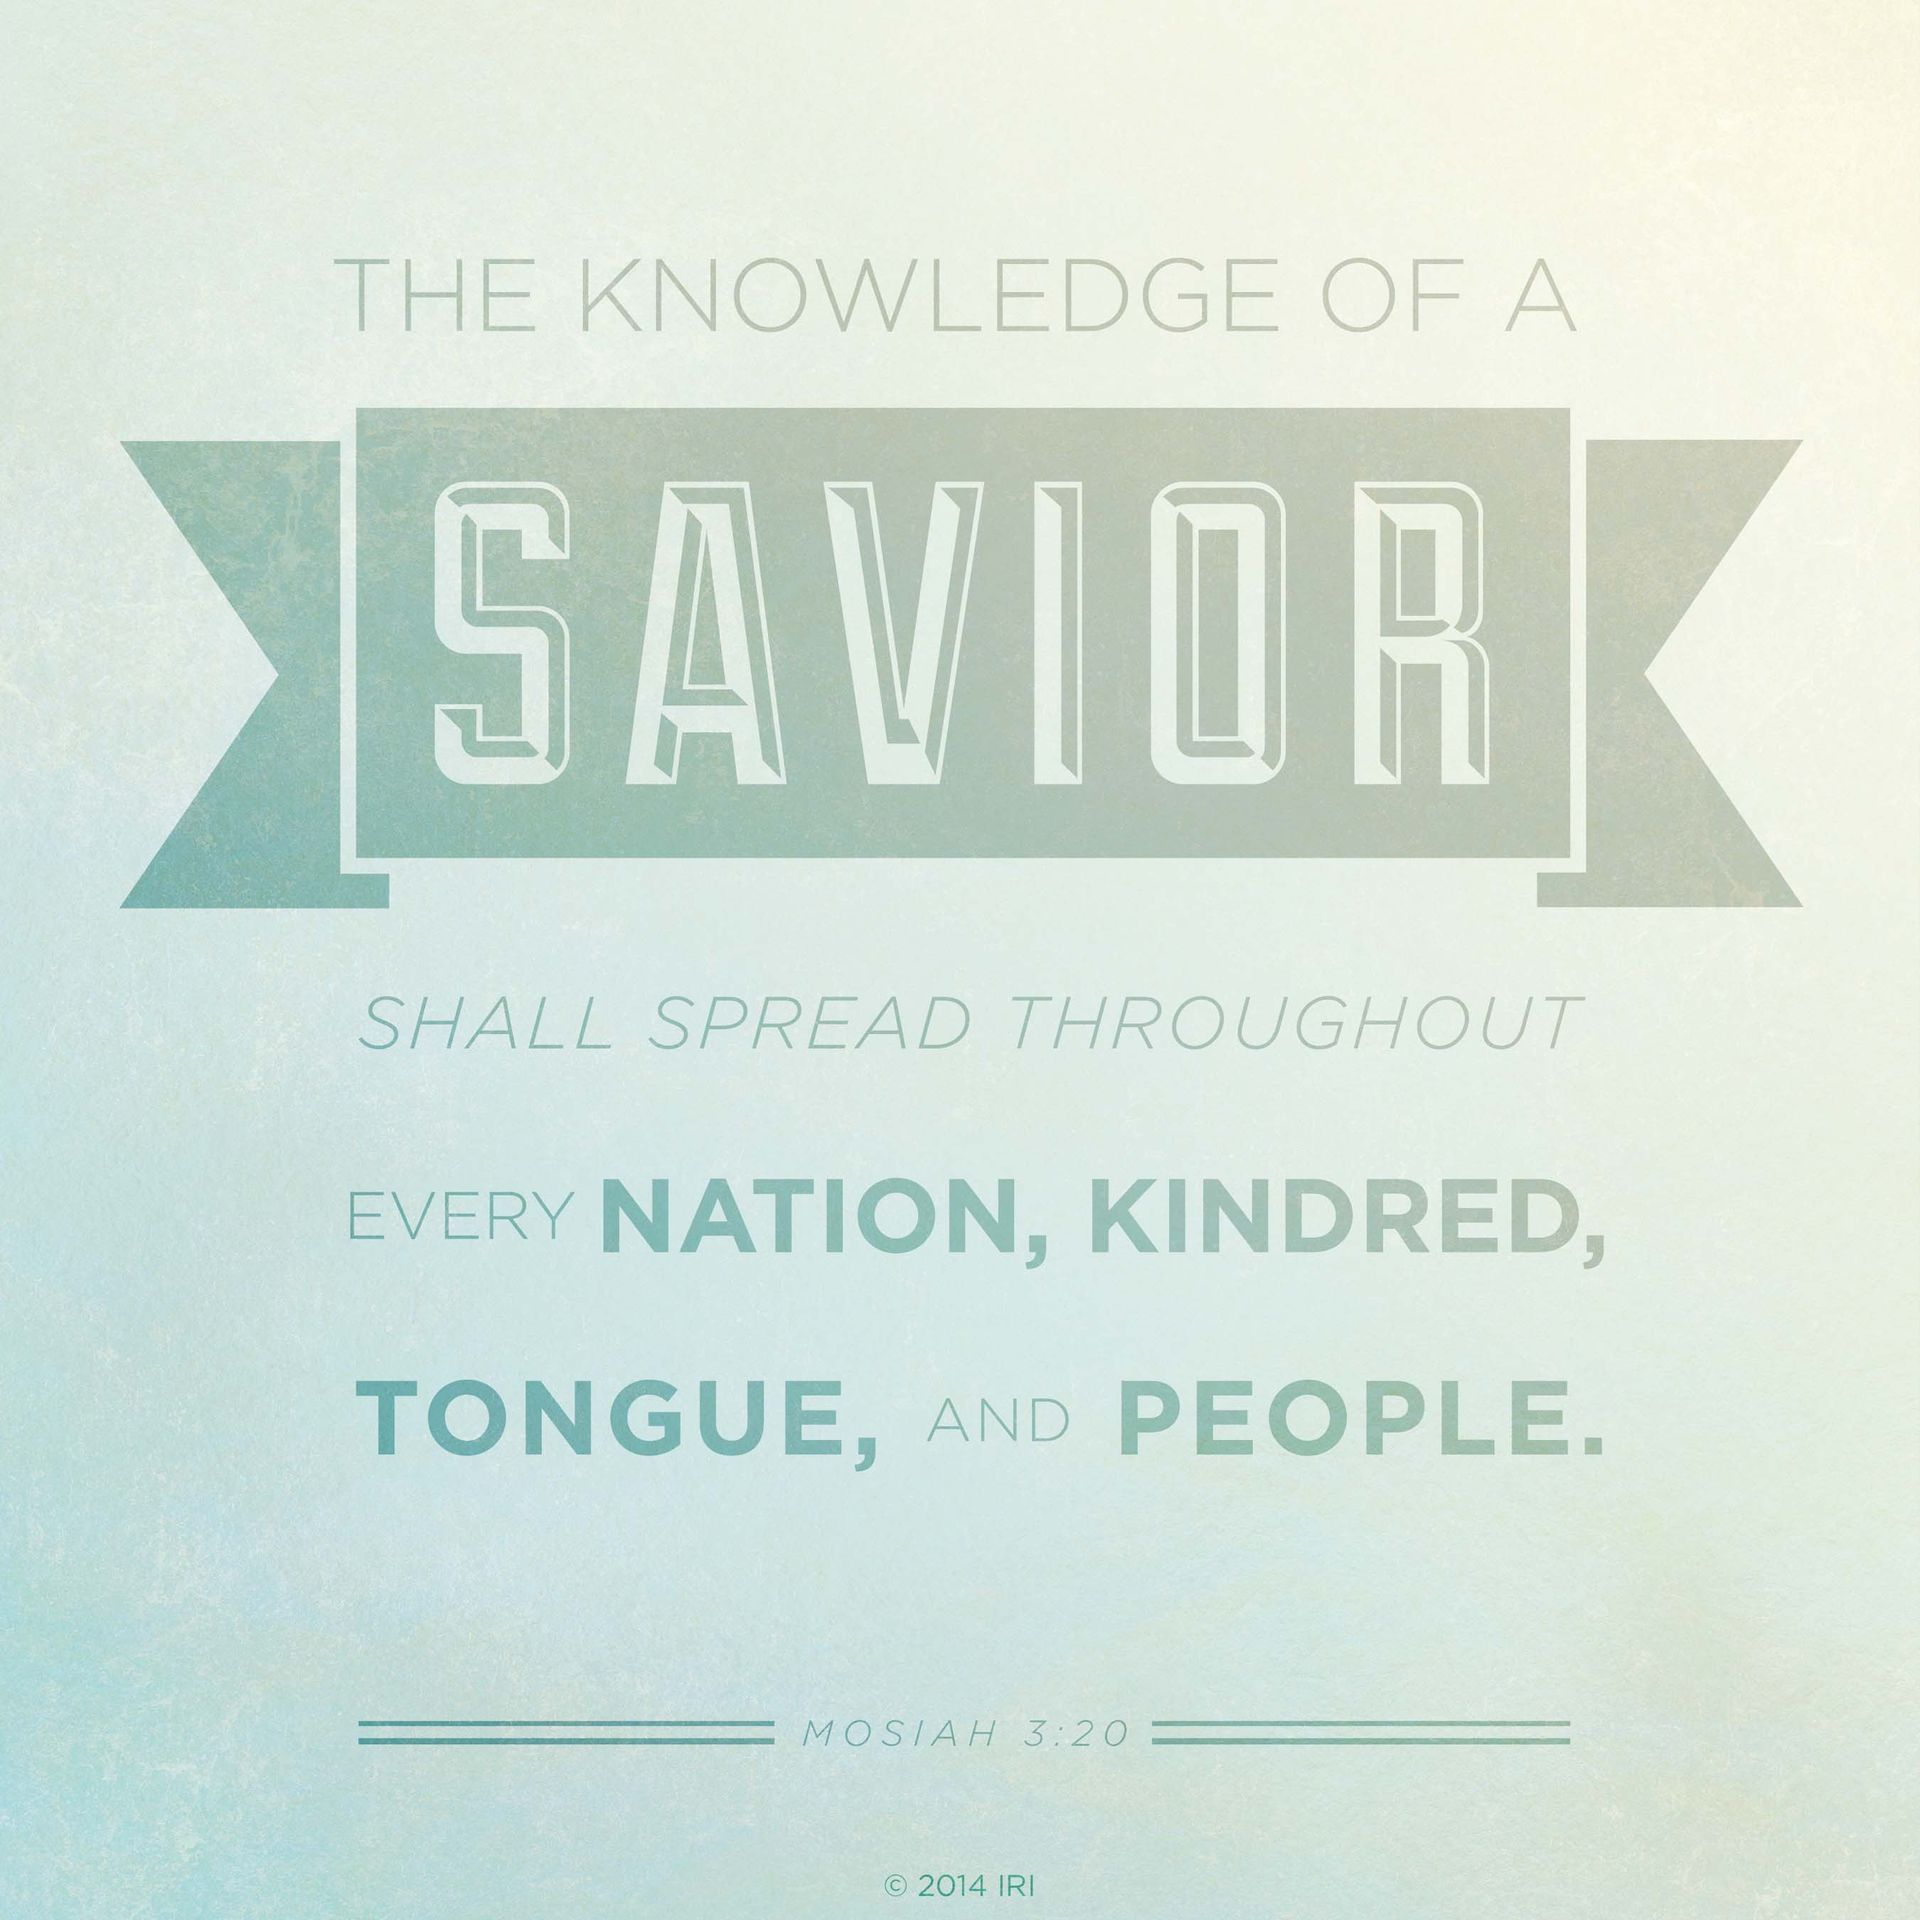 “The knowledge of a Savior shall spread throughout every nation, kindred, tongue, and people.”—Mosiah 3:20